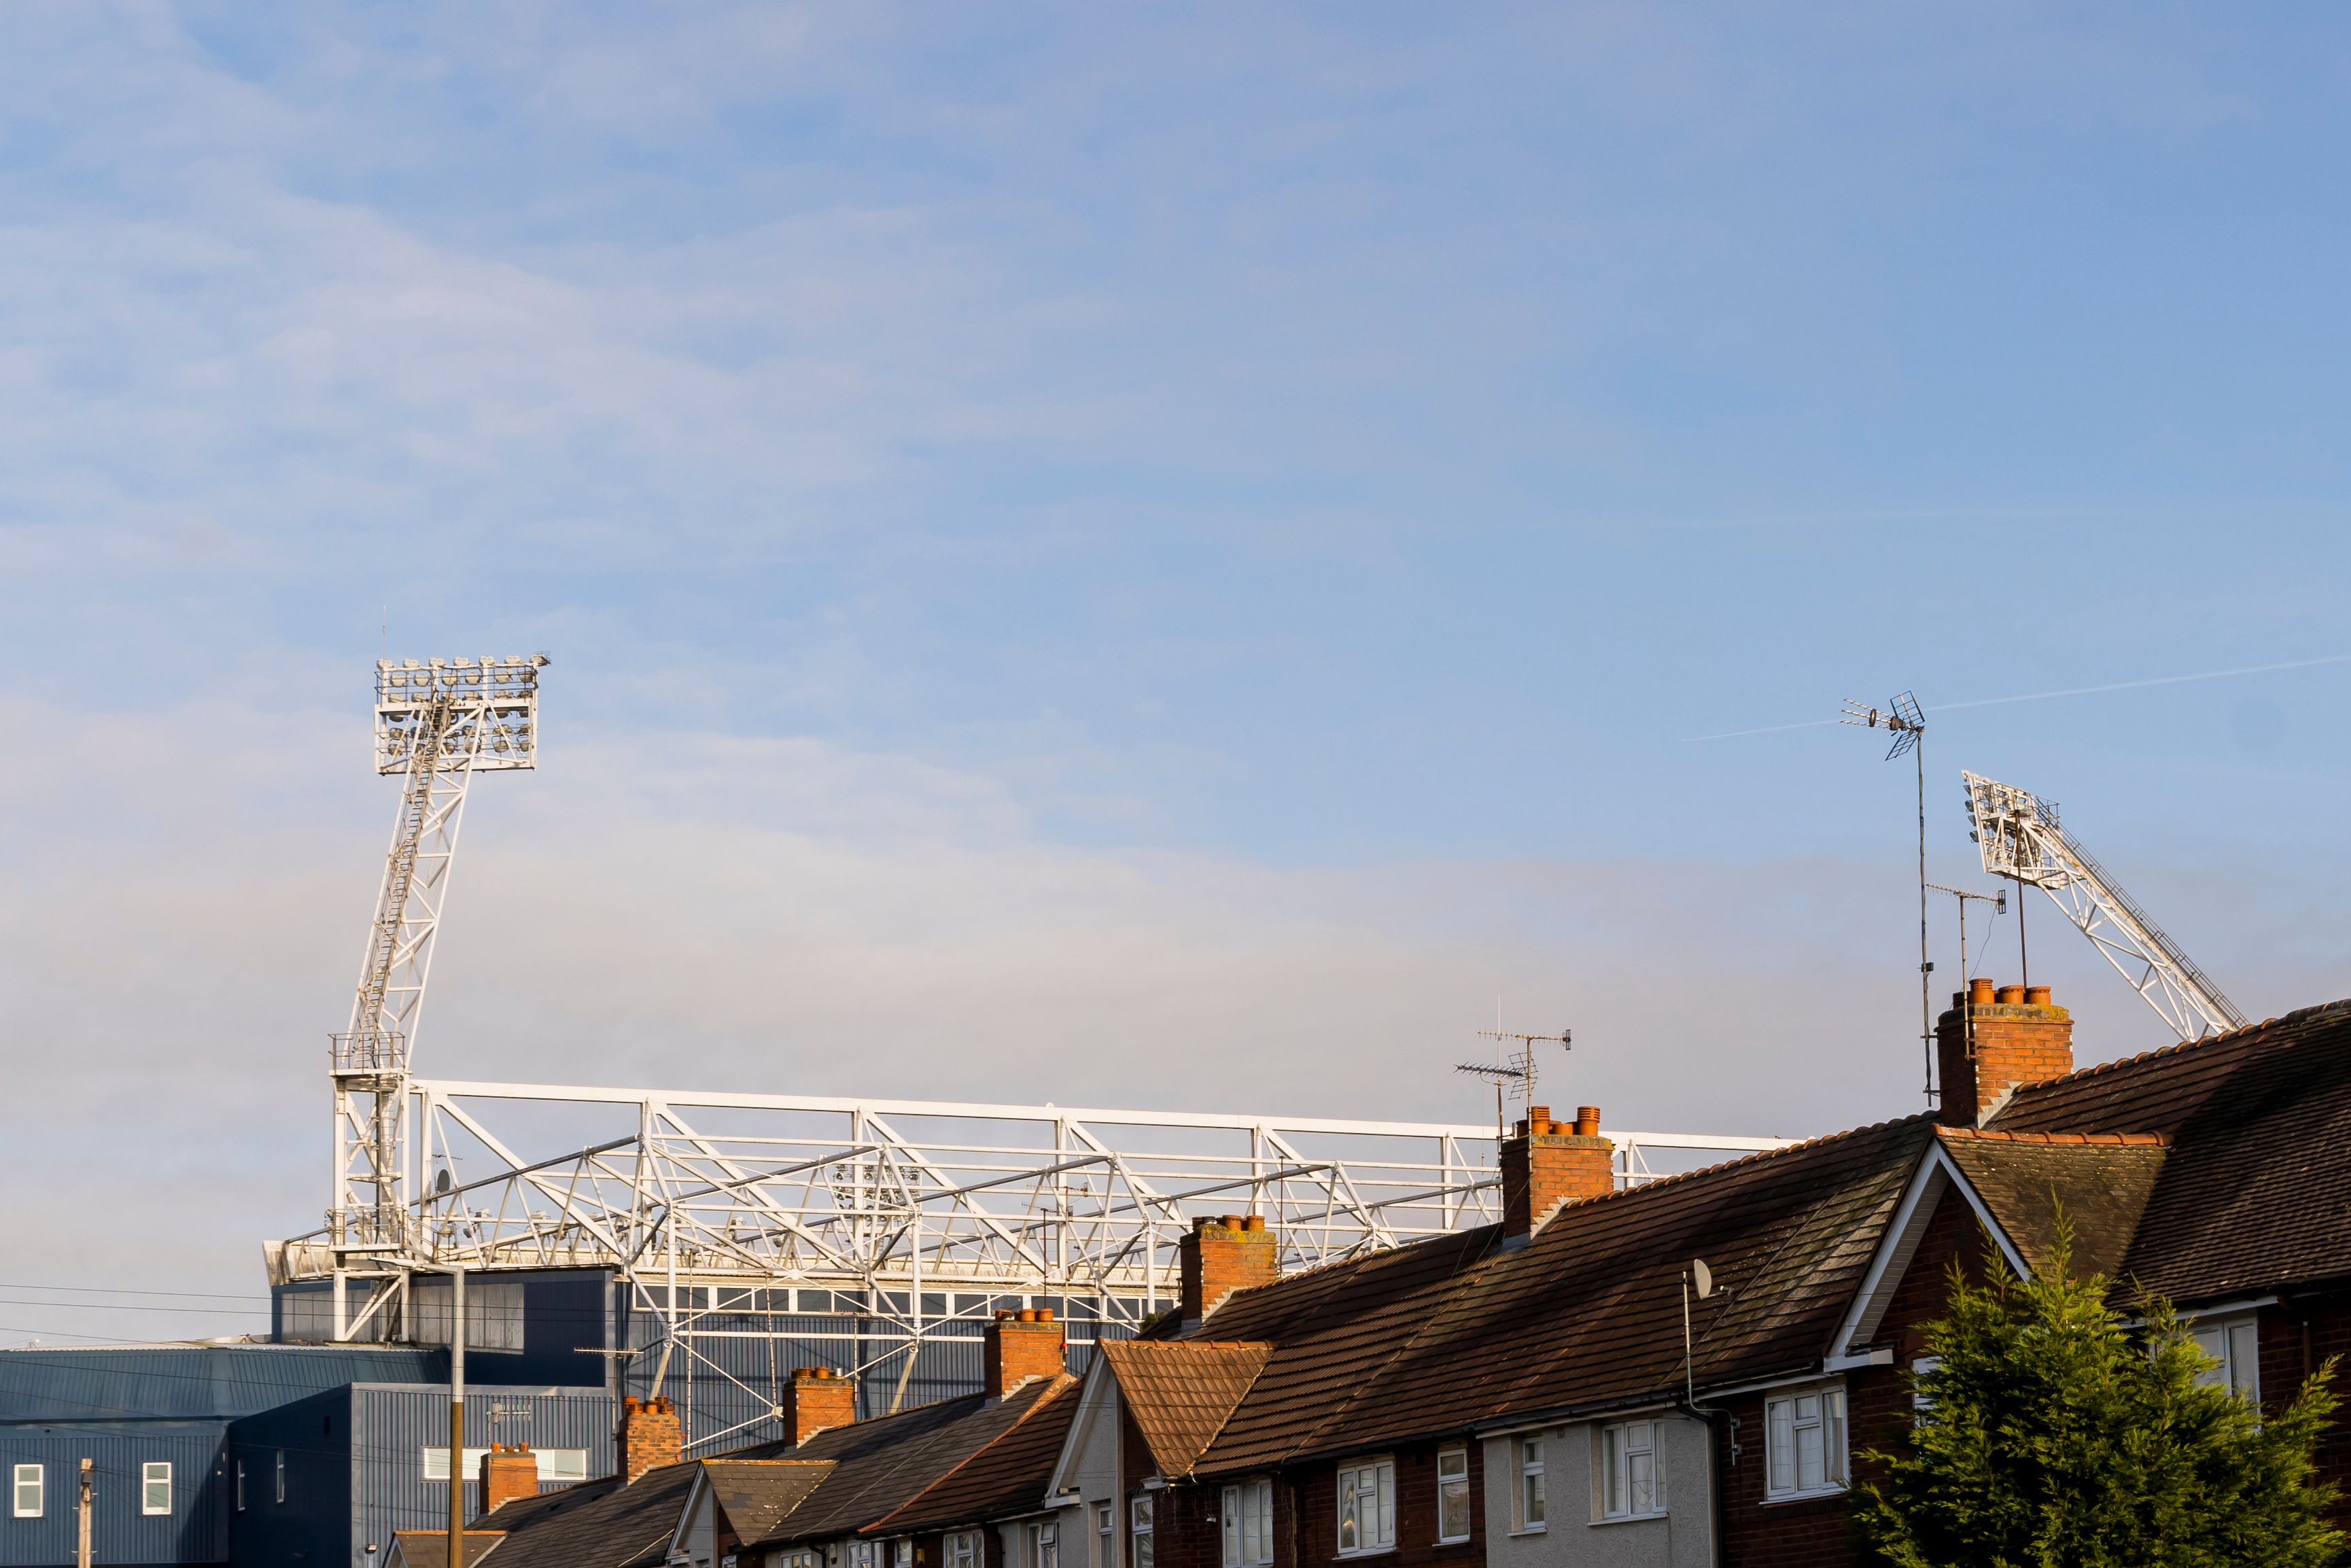 A general view of the back of the Smethwick End at The Hawthorns